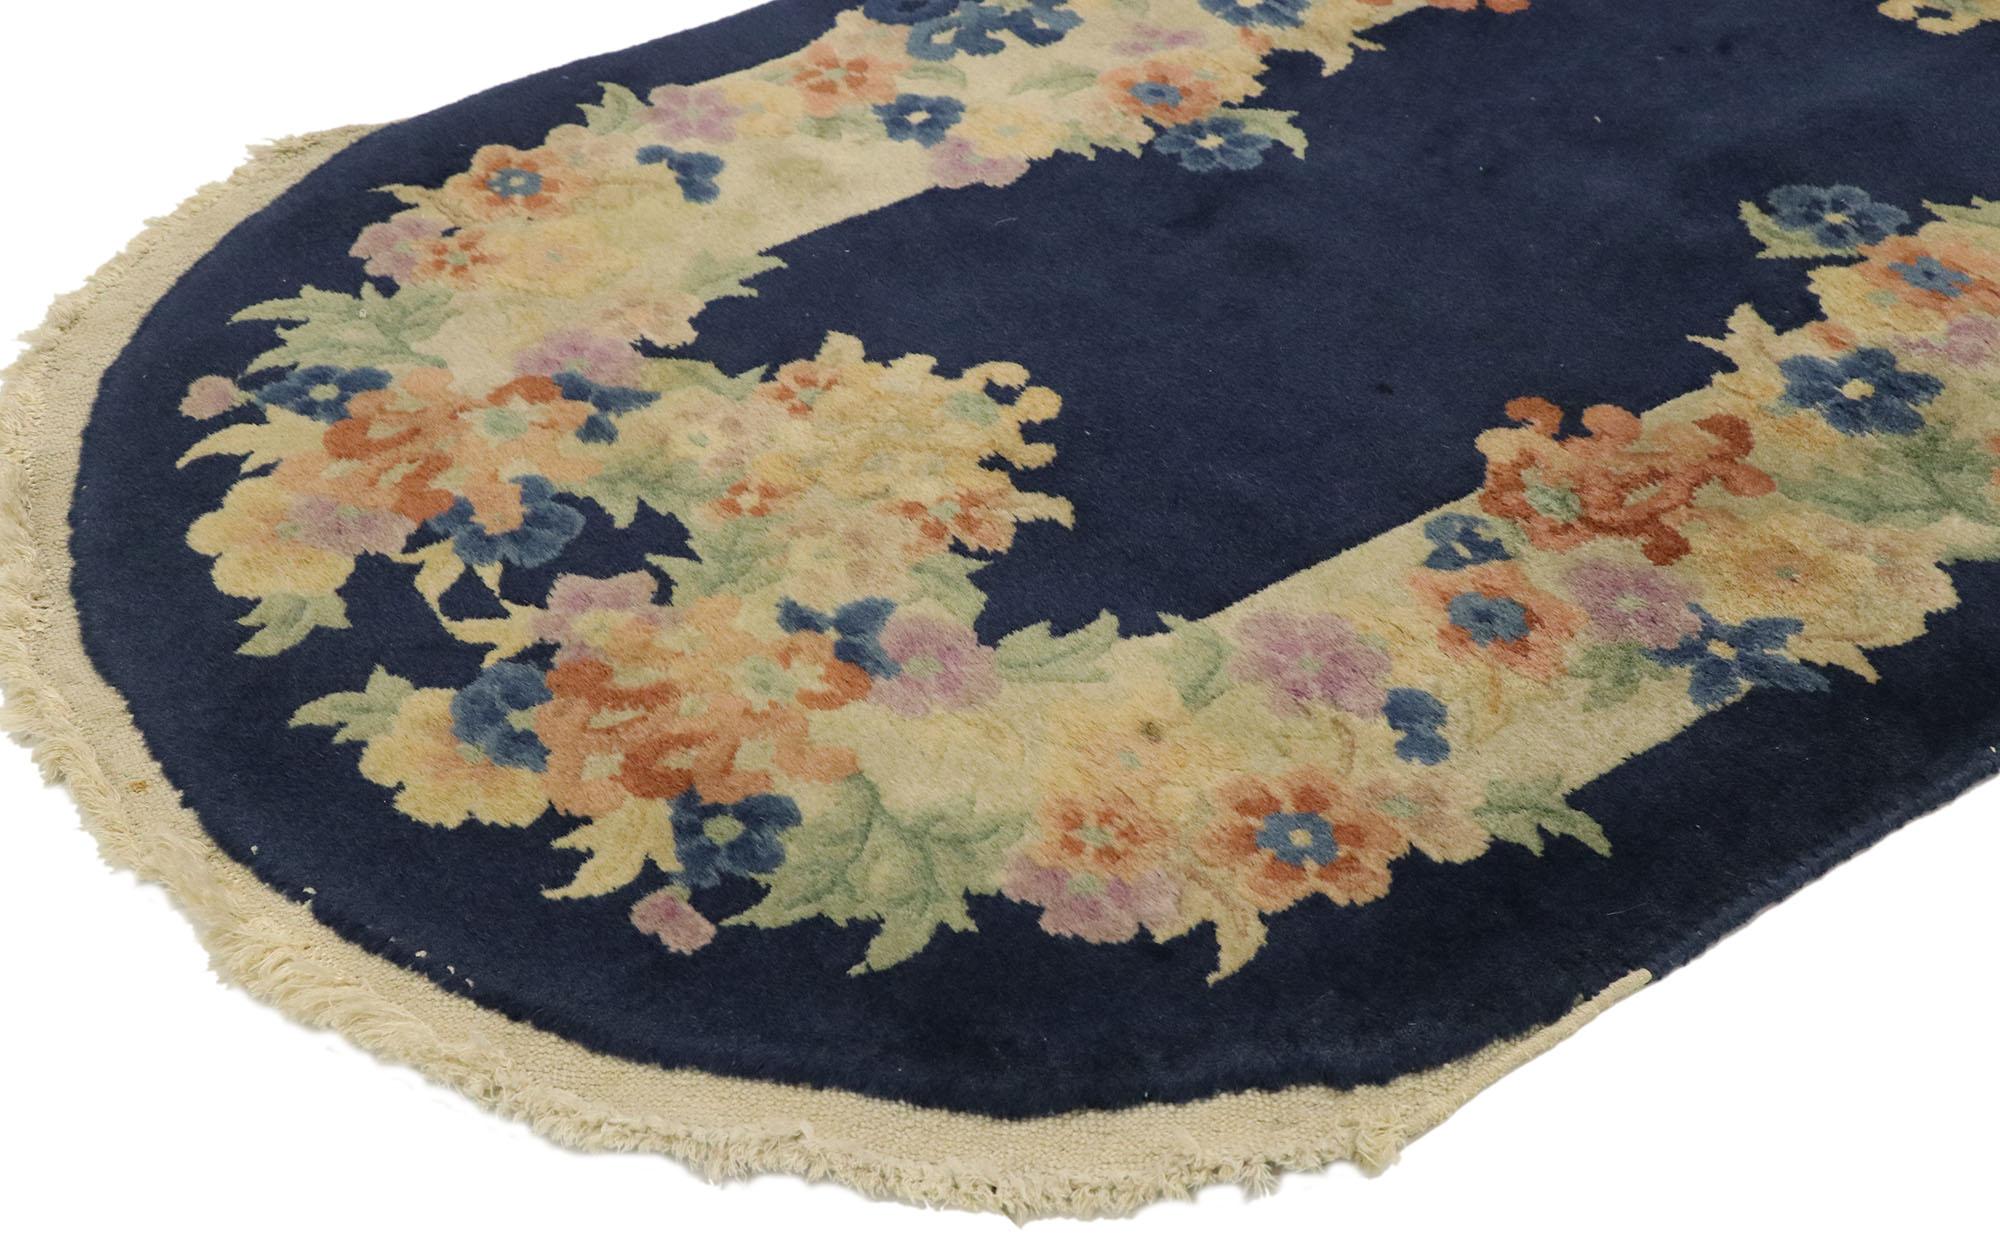 77463, antique Chinese Art Deco style oval rug with Romantic chinoiserie style. This hand knotted wool antique Chinese Art Deco rug features a midnight navy blue field and contrasting border festooned with scrolling floral vines meandering along the